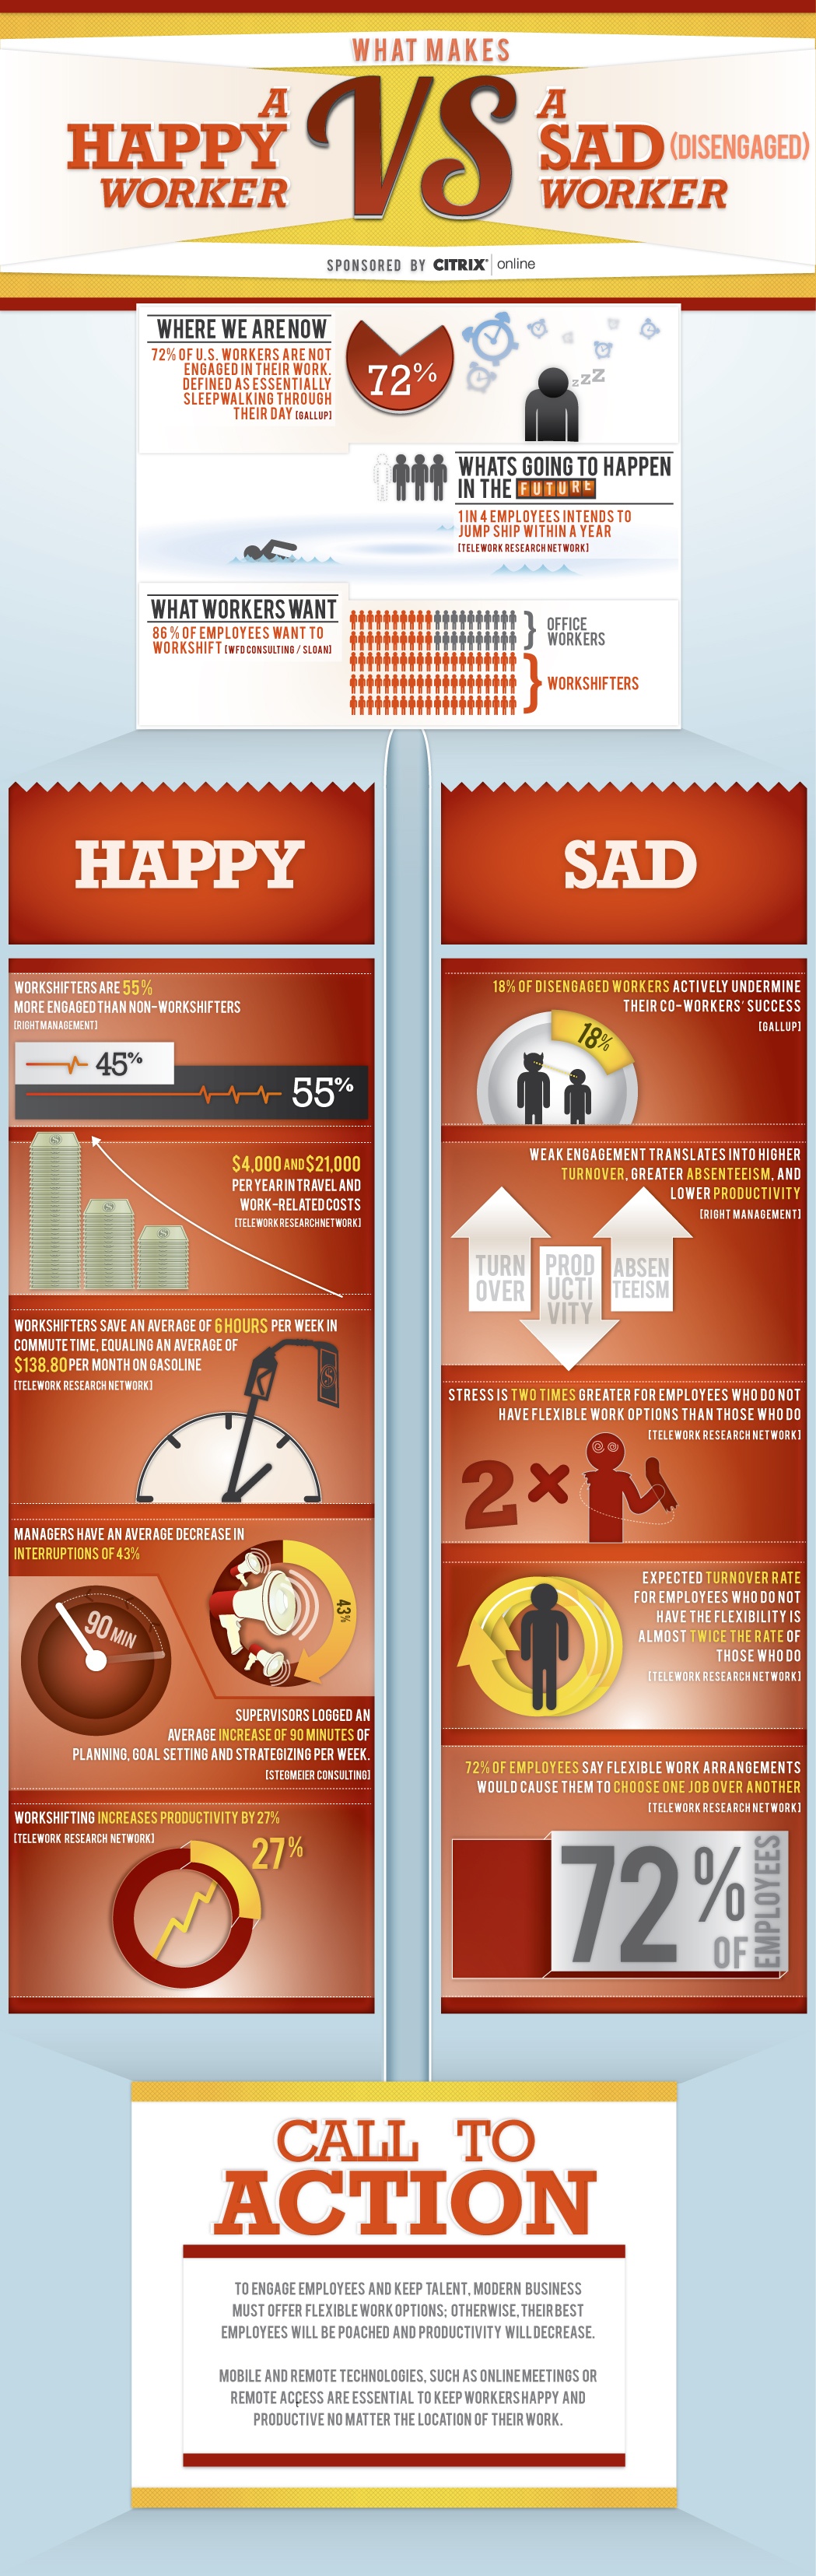 Infographic on the Importance of Employee Engagement